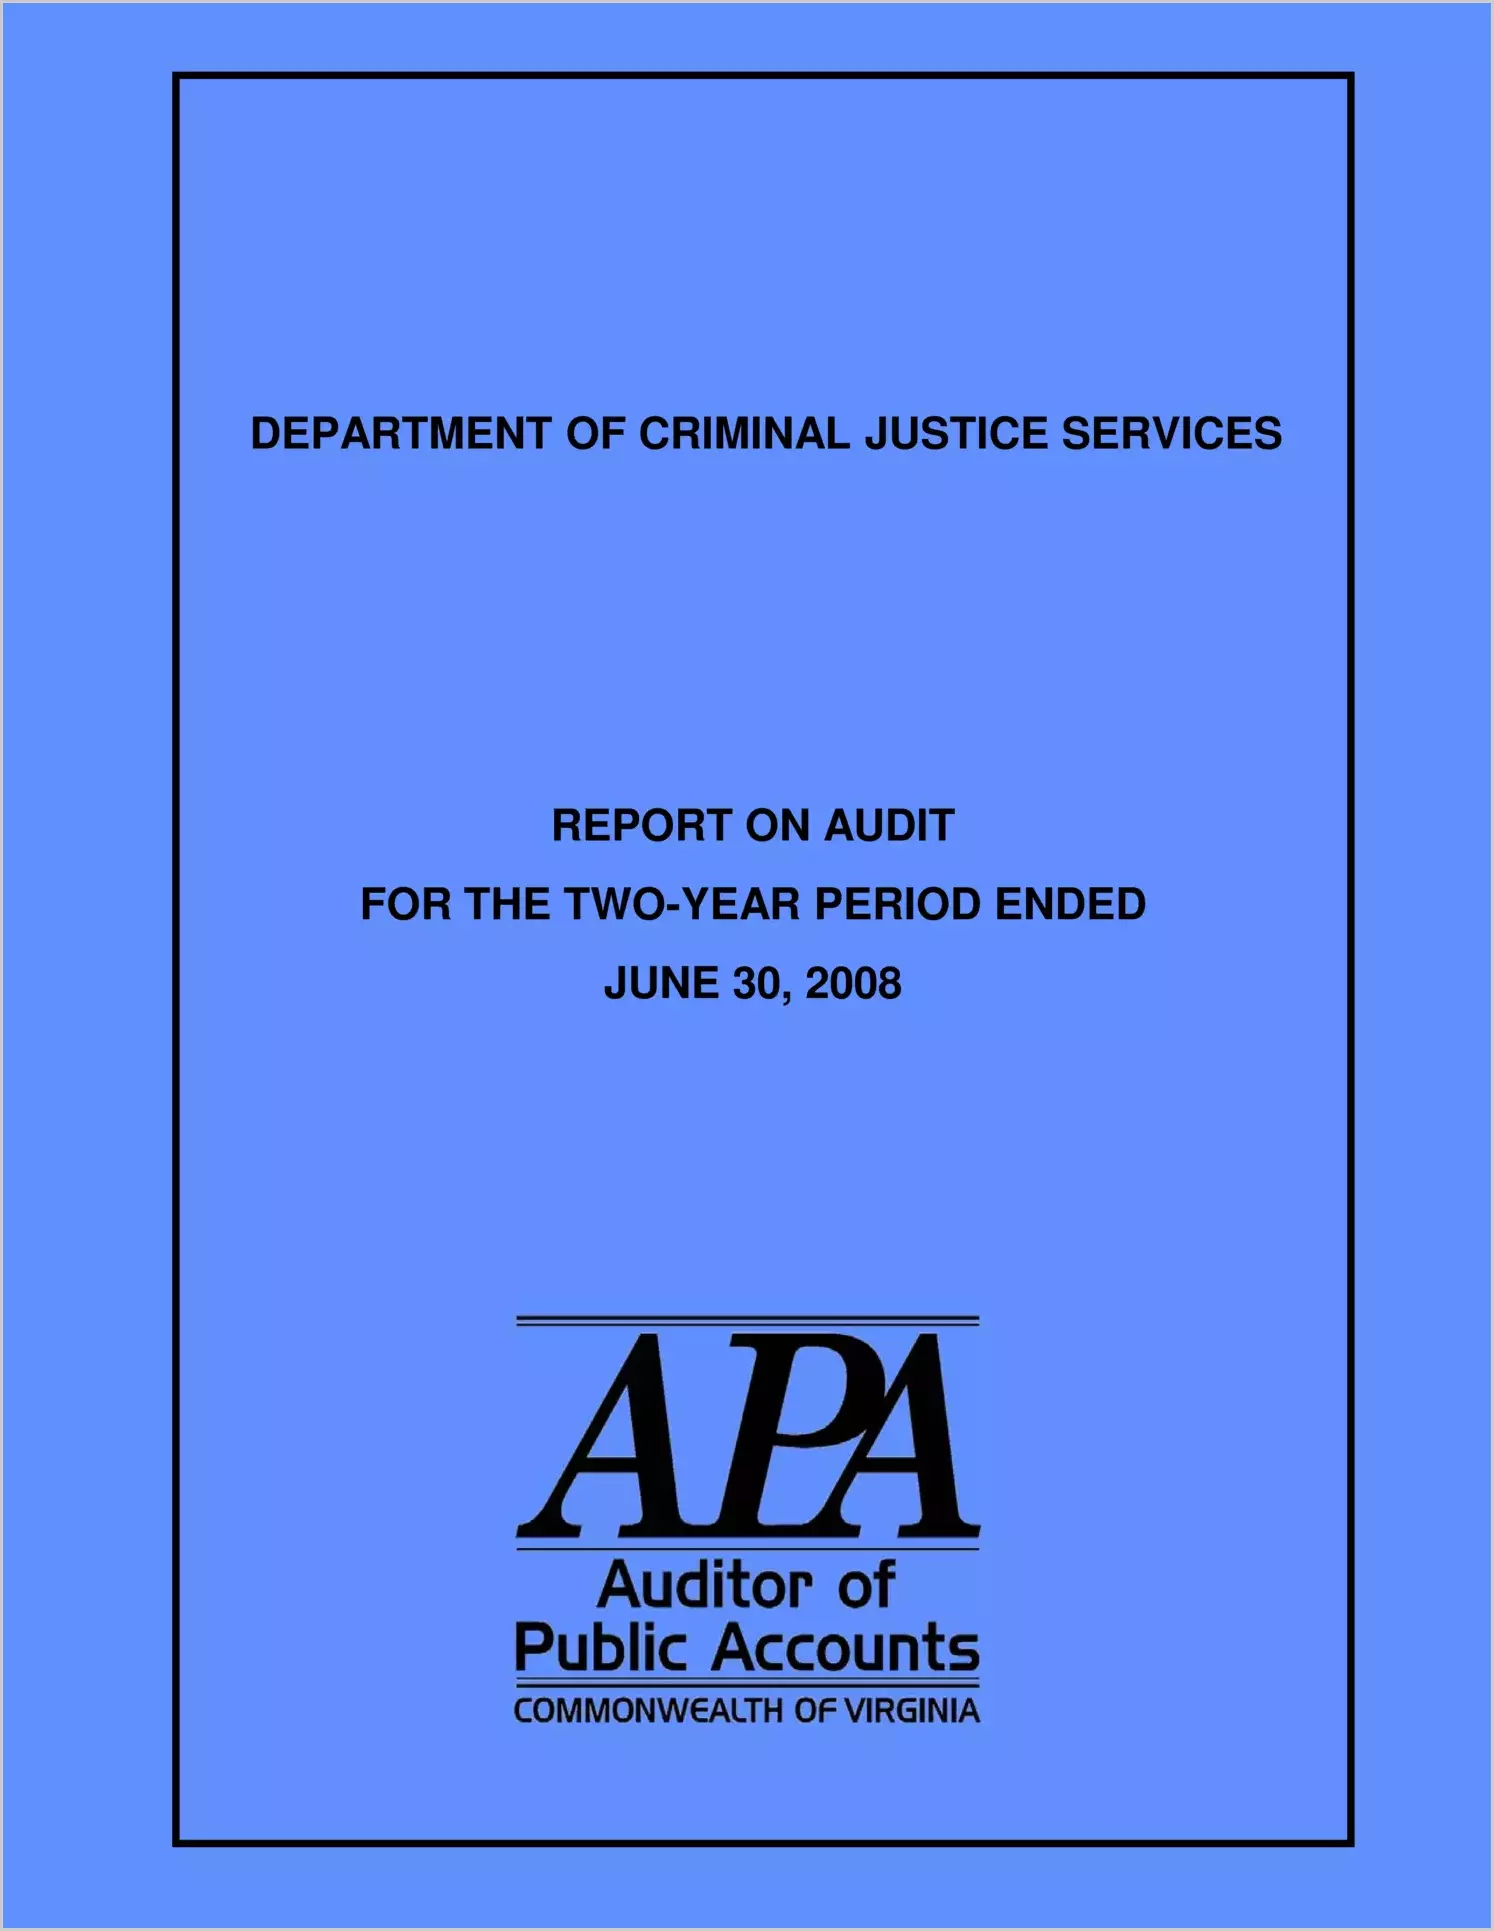 Department of Criminal Justice Services for the two-year period ended June 30, 2008